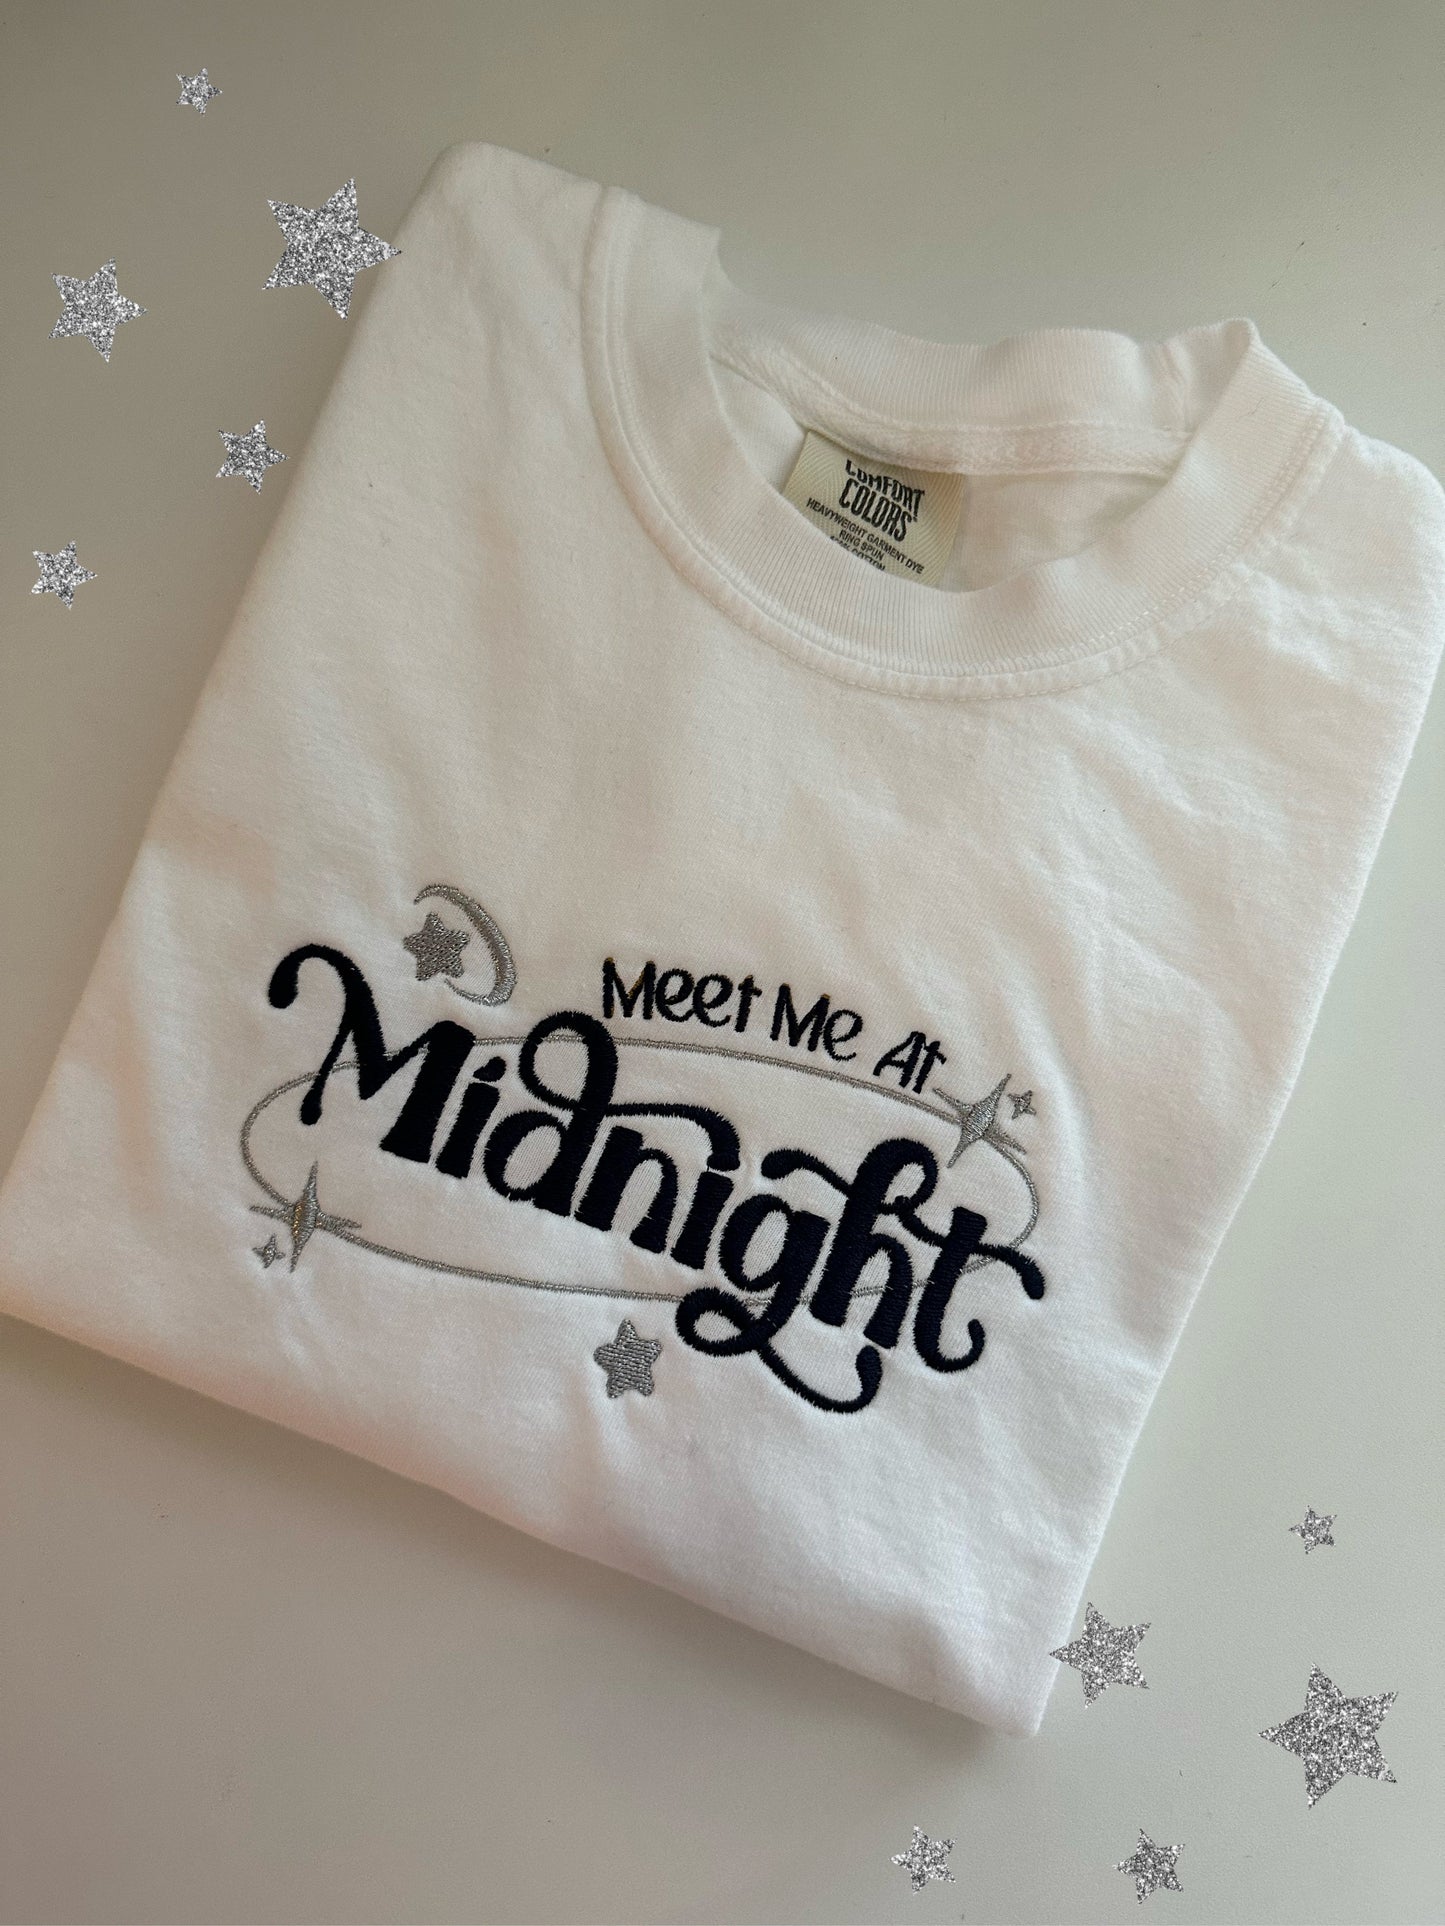 Meet Me at Midnight embroidered T-SHIRT